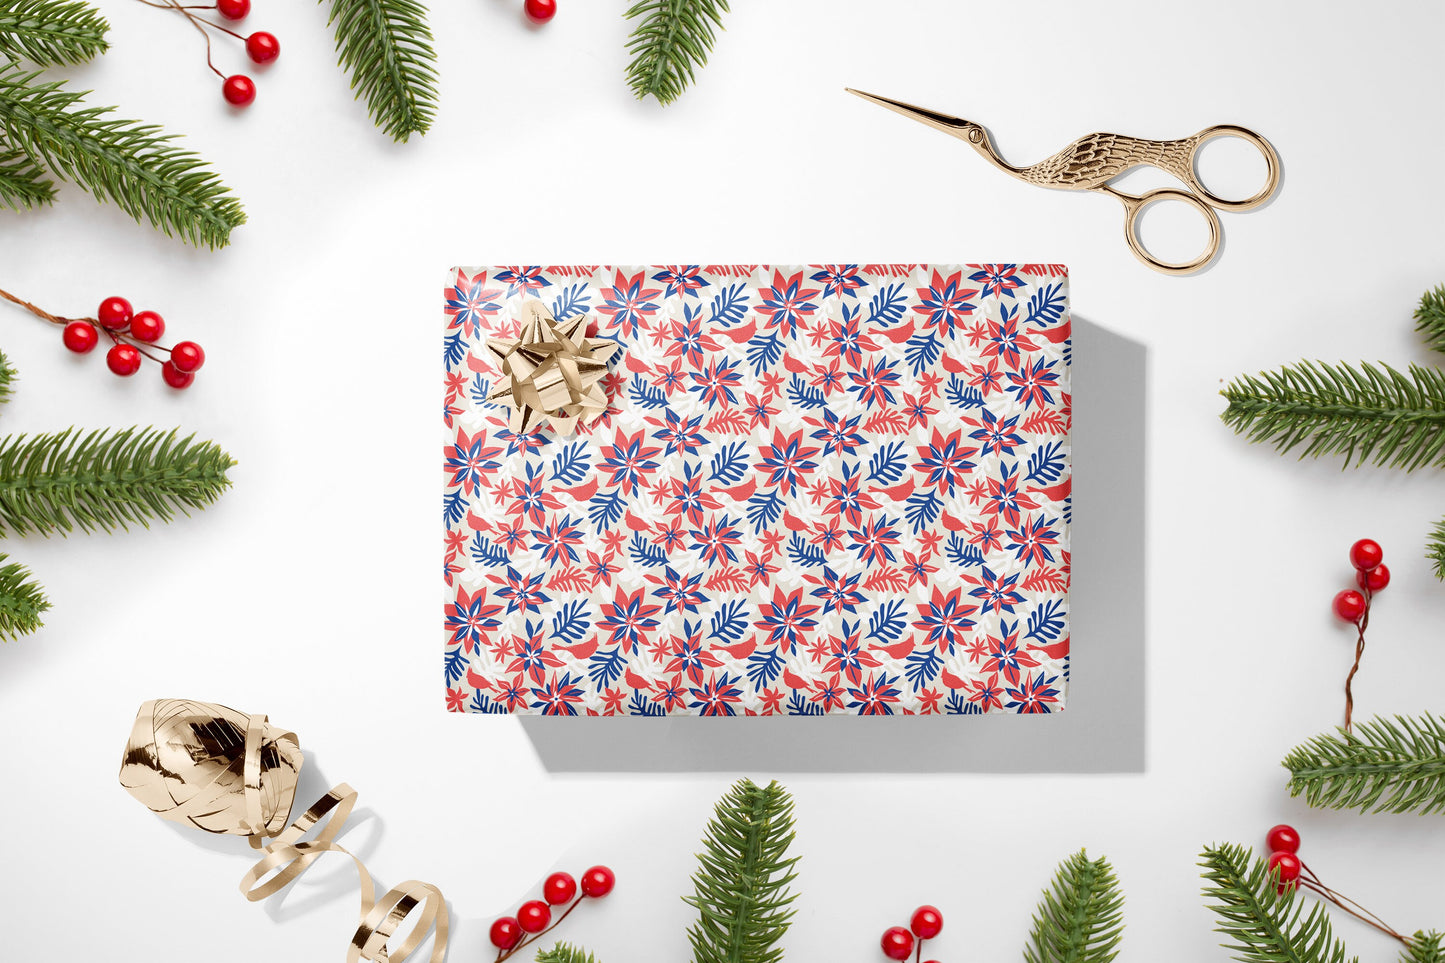 Christmas Poinsettia Wrapping Paper, Henri Matisse Inspired Gift Wrap, Festive Wrapping Paper, Red and Blue Gift Wrapping Paper